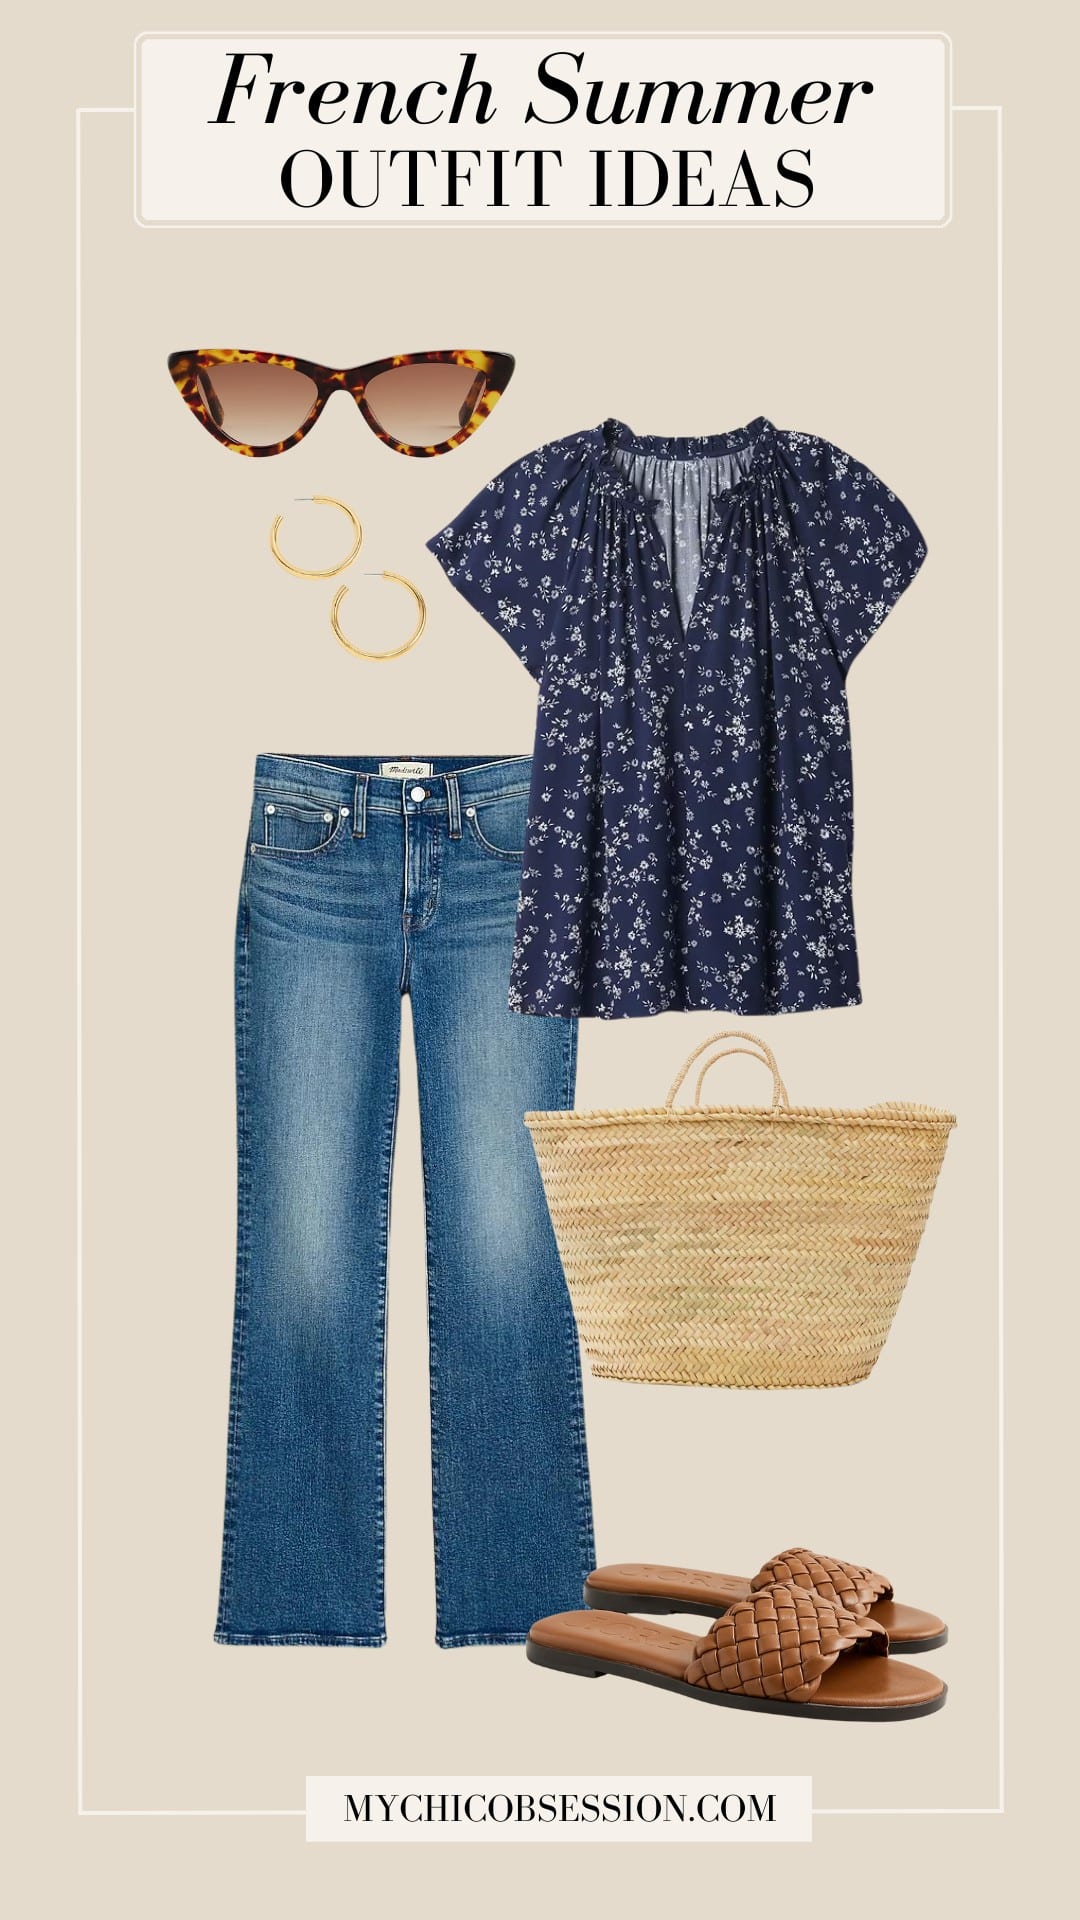 french summer outfit - floral top flare jeans woven sandals basket tote